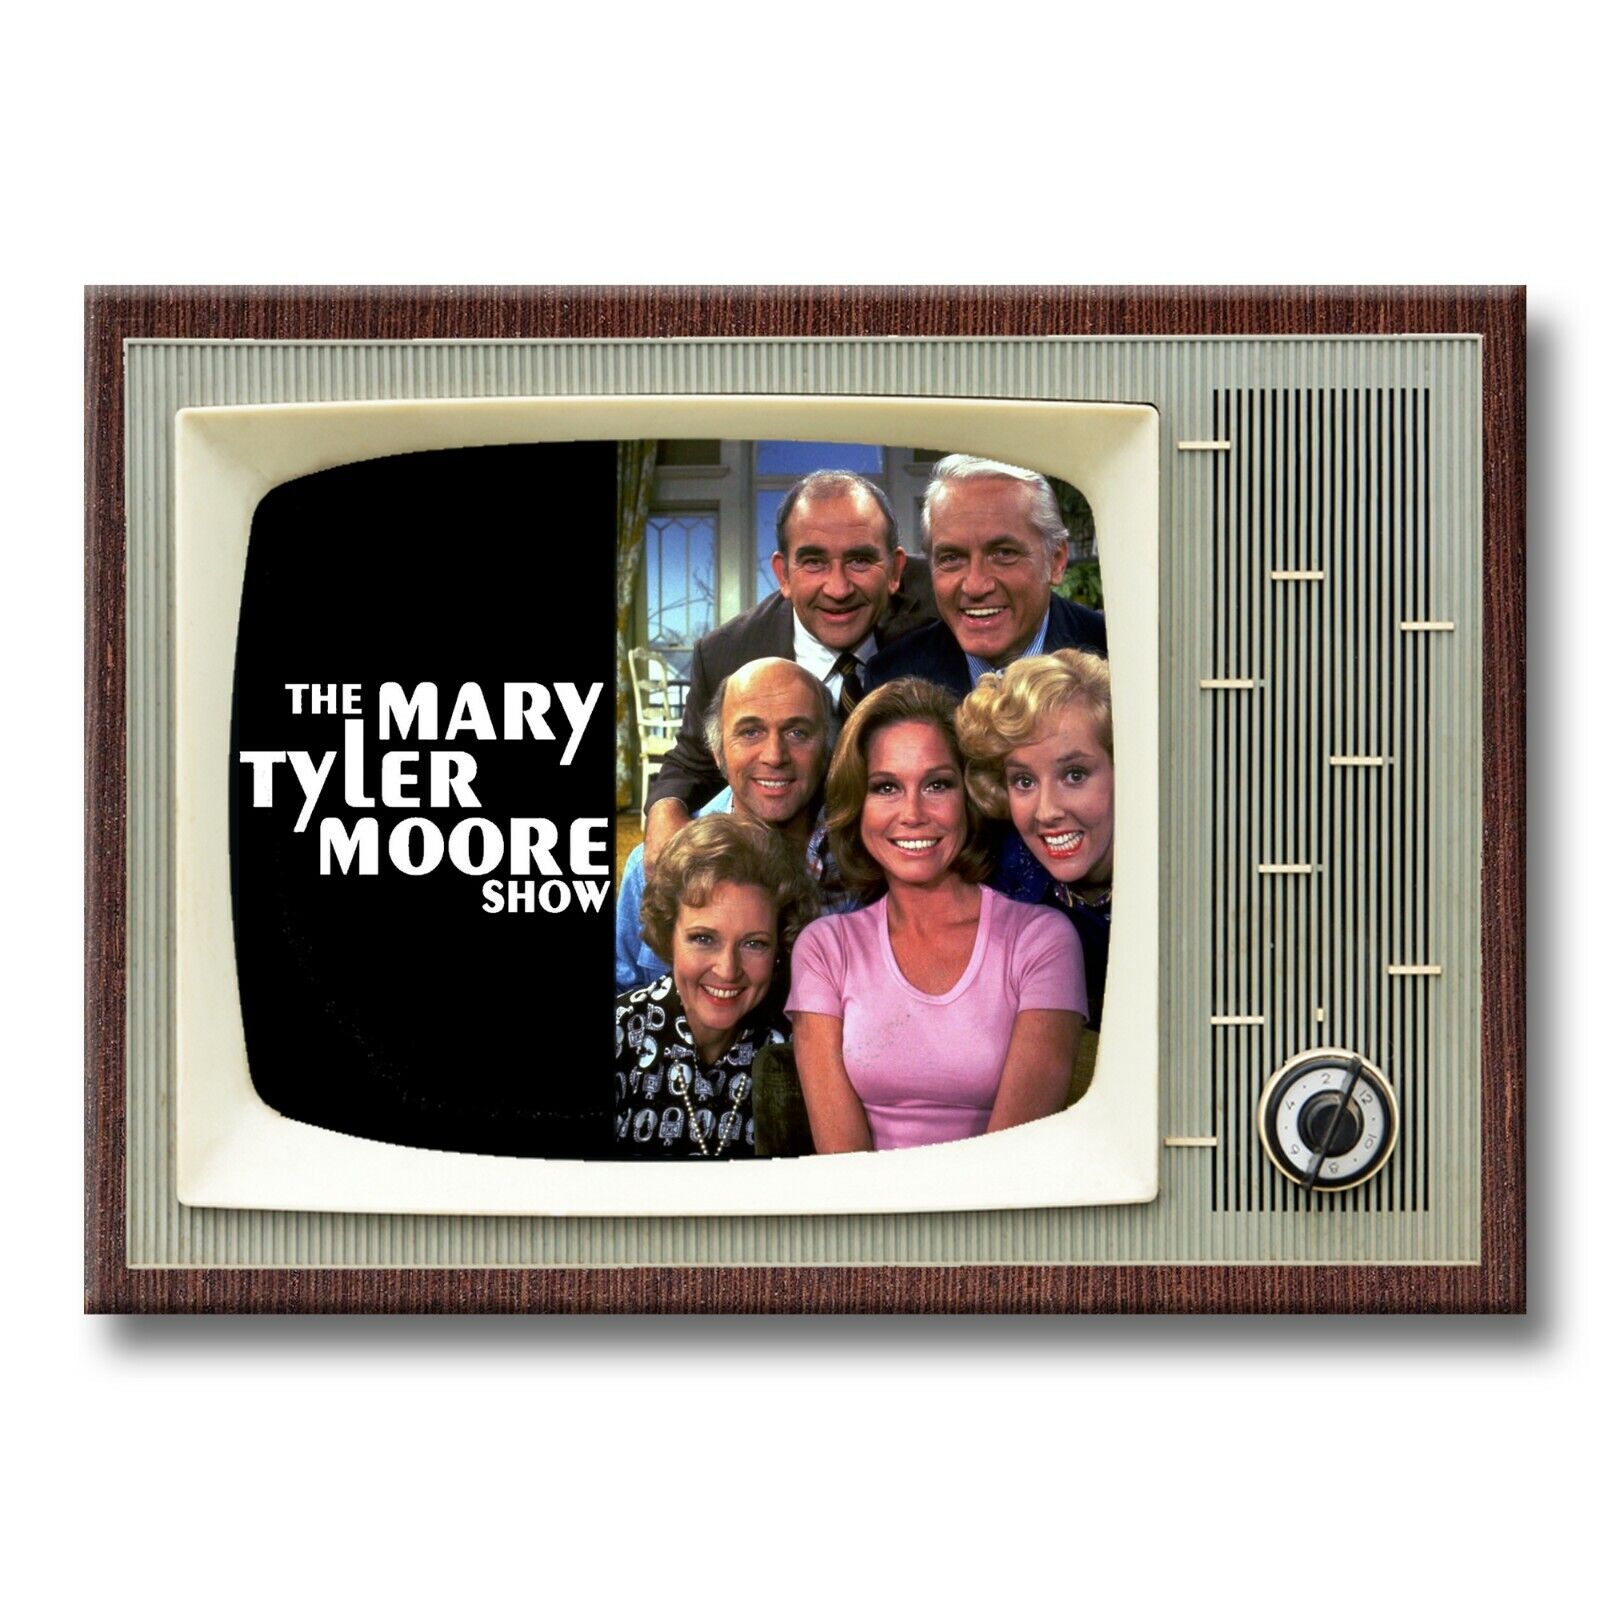 MARY TYLER MOORE TV Show Classic TV 3.5 inches x 2.5 inches Steel FRIDGE MAGNET